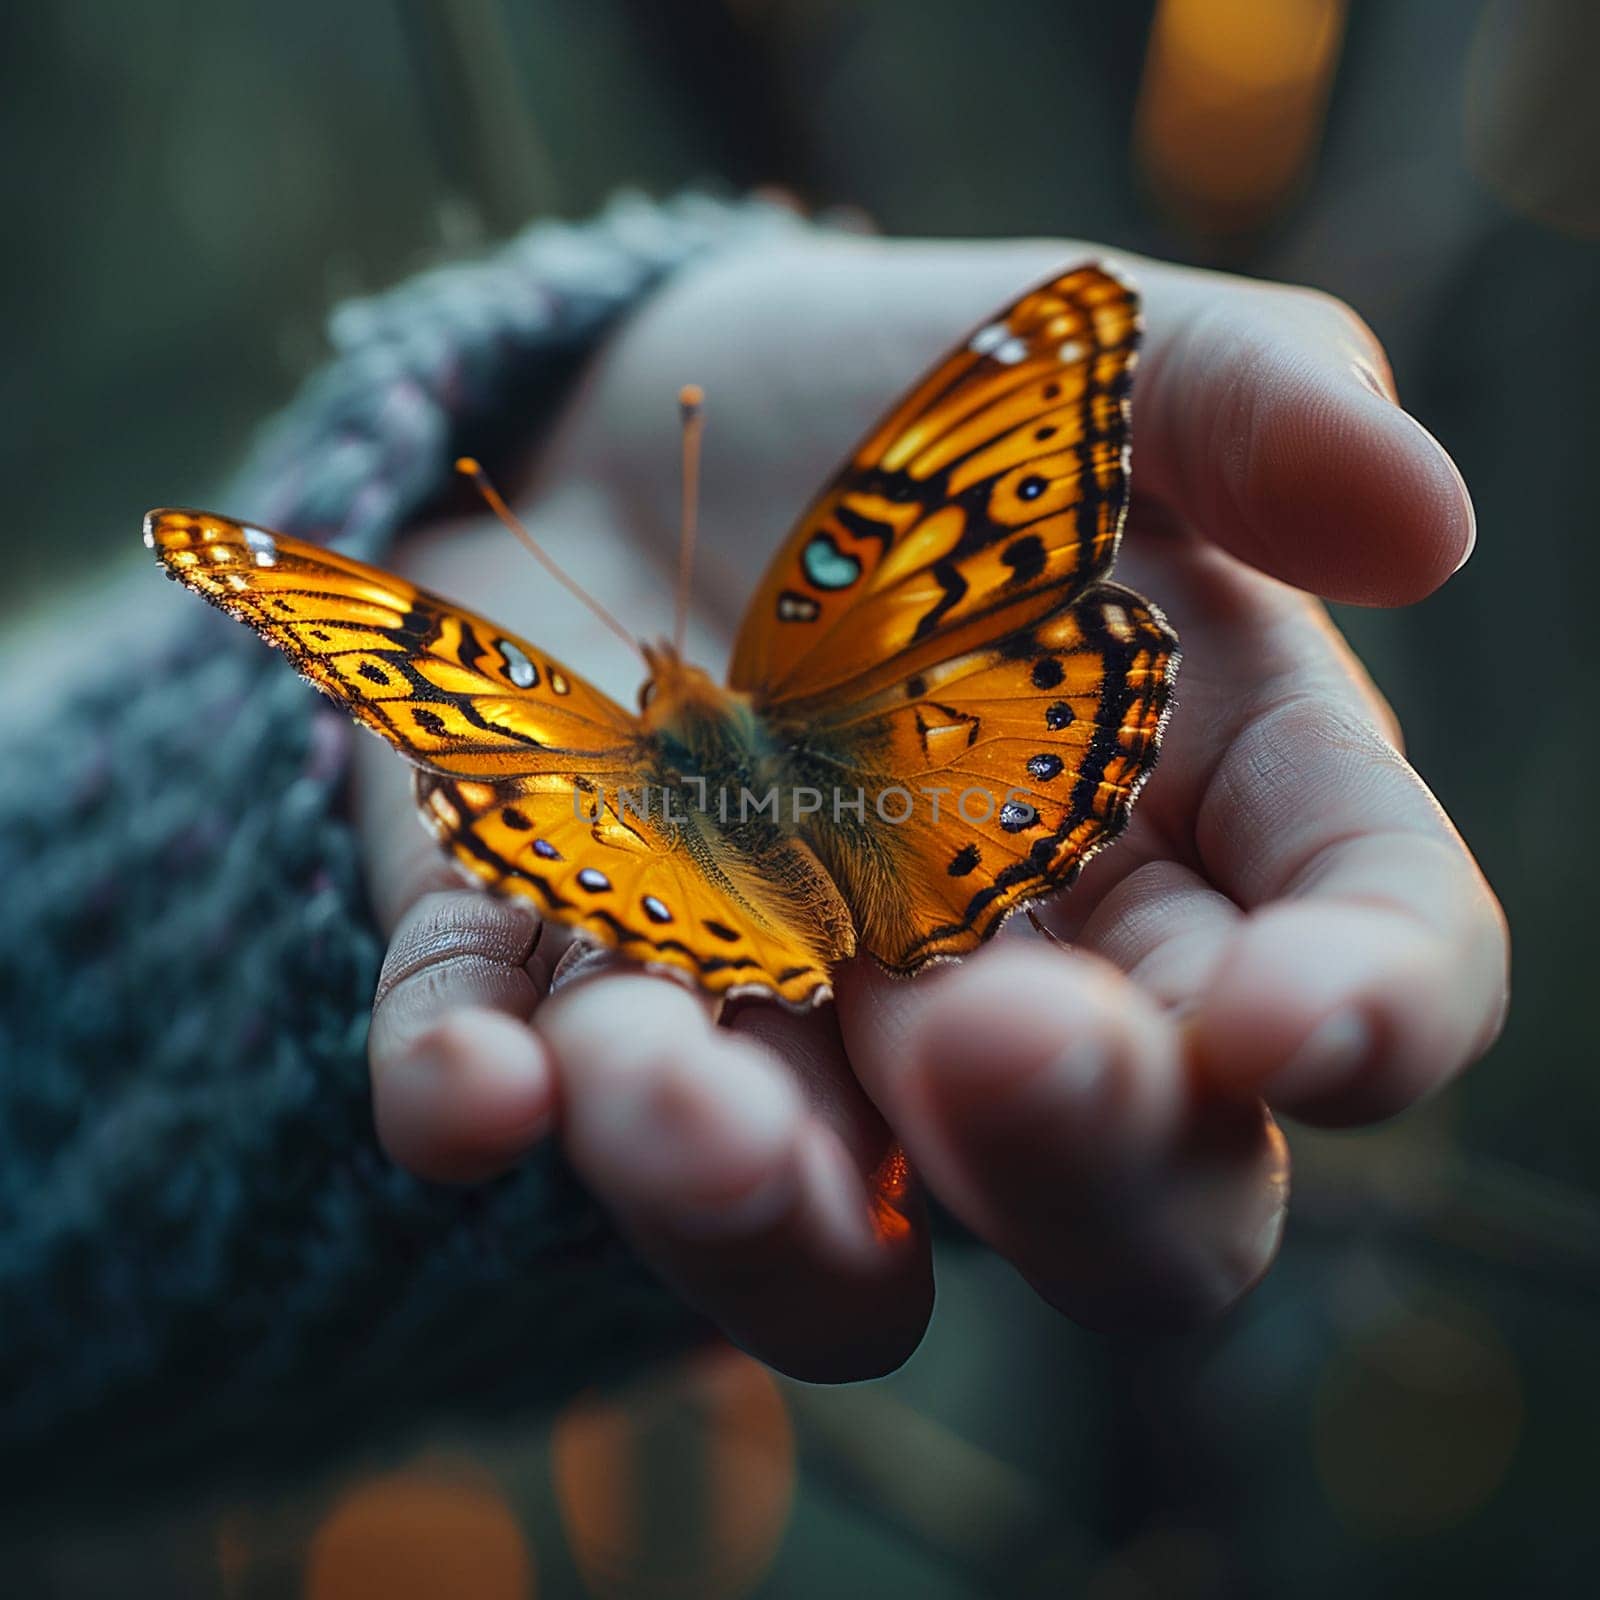 Hand holding a fragile butterfly, depicting delicacy, nature, and freedom.